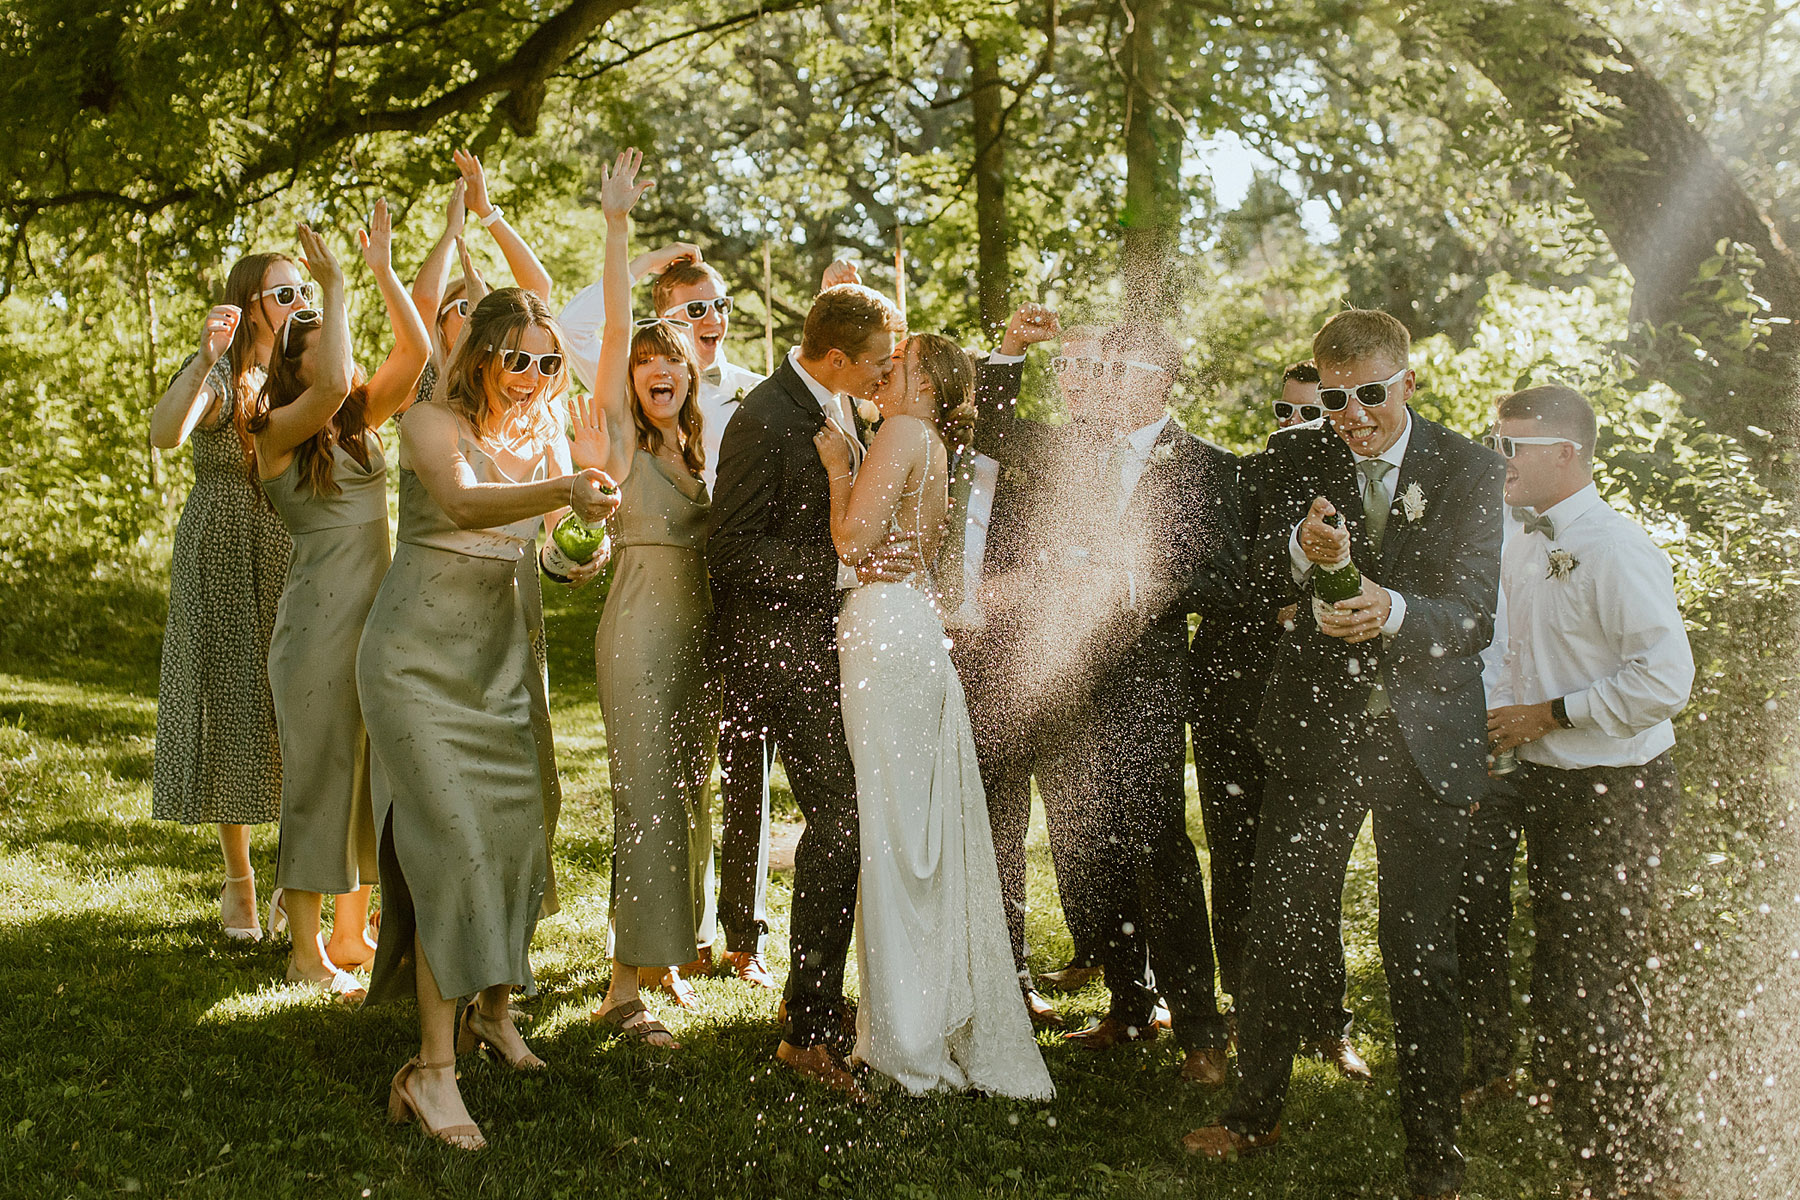 champagne pop with bridal party for fun wedding photo